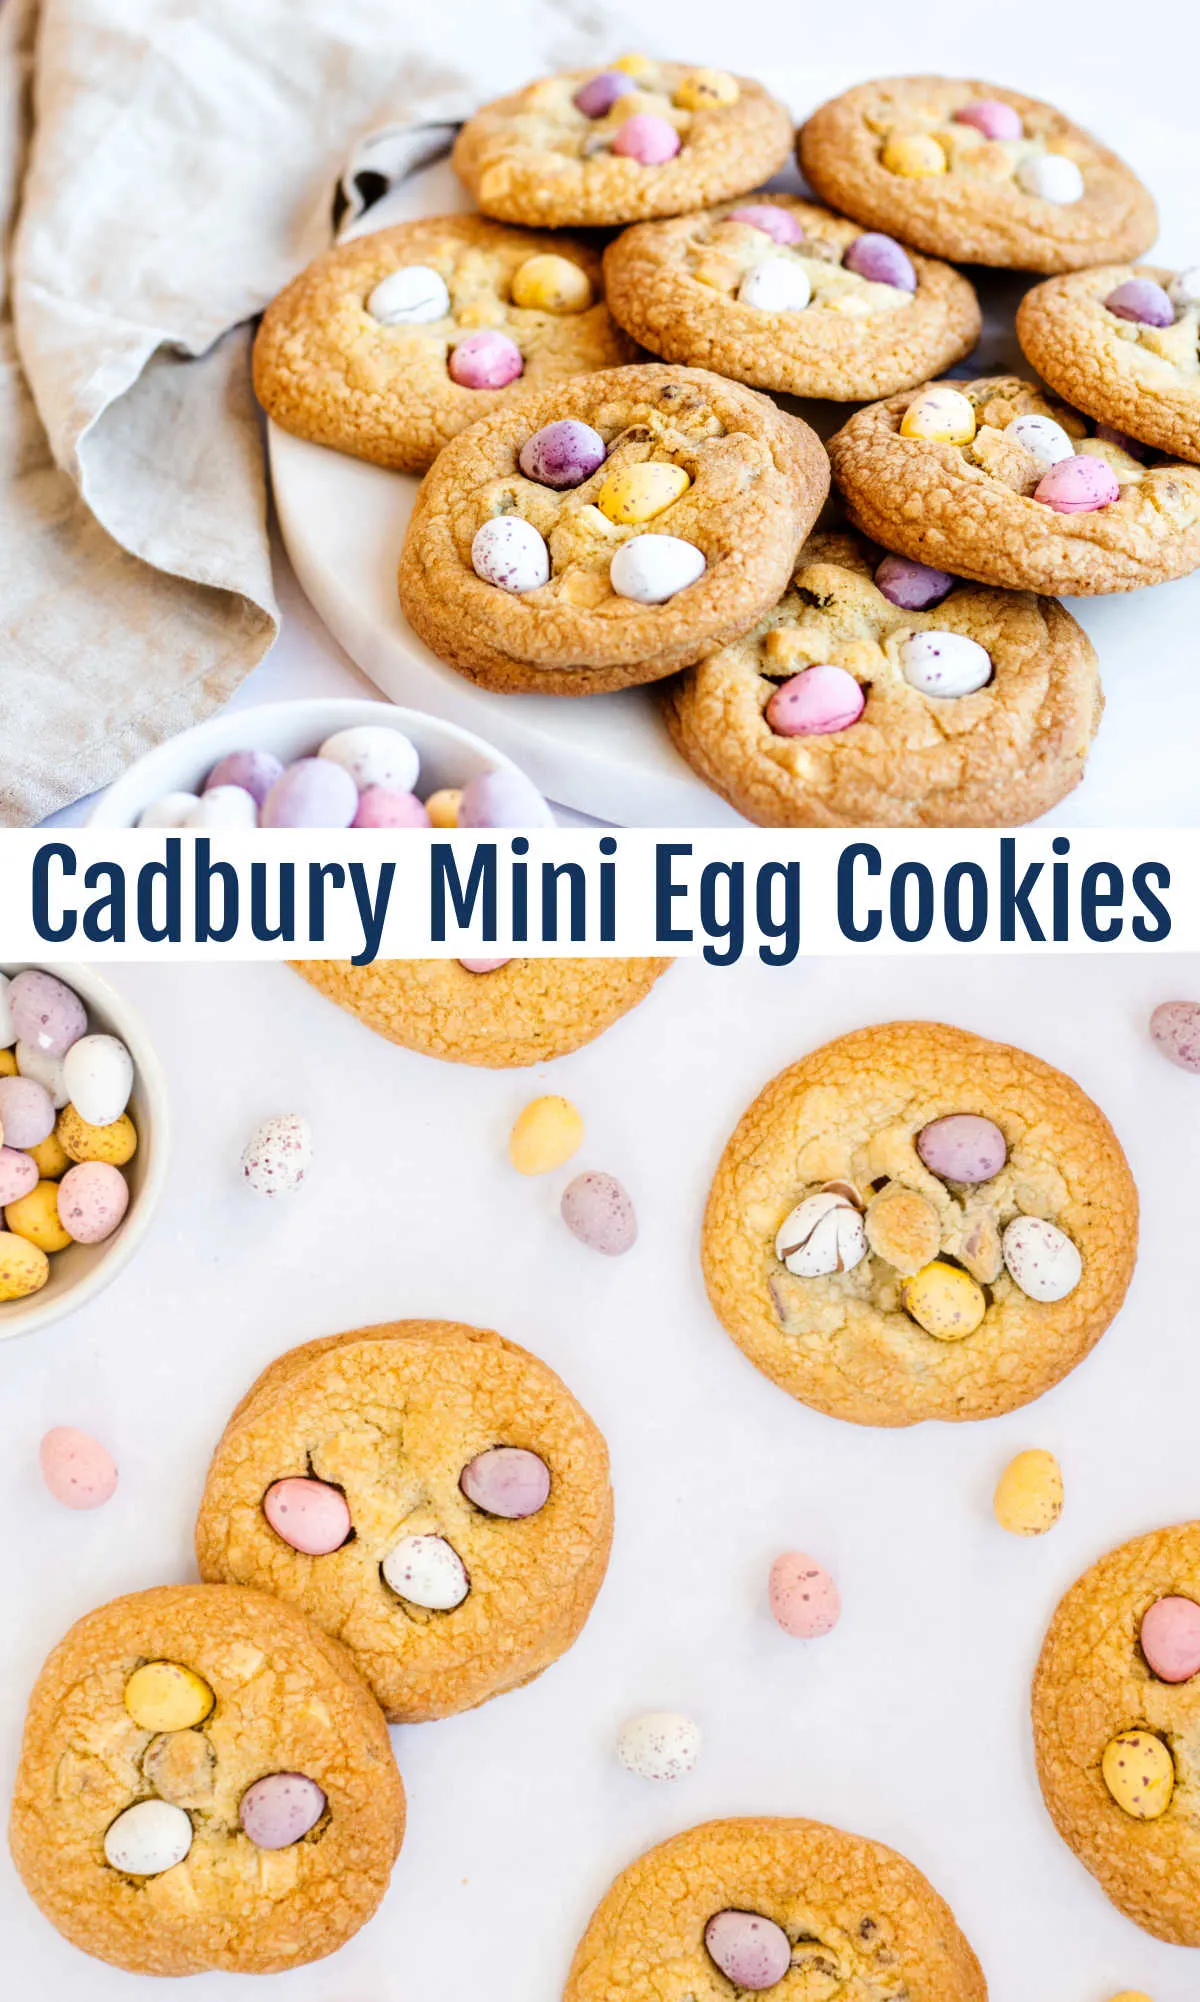 Cadbury mini egg cookies combine our favorite Easter candy with white chocolate chunks in big chewy cookies. What a wonderful way to make your spring cookies cuter and even more tasty.